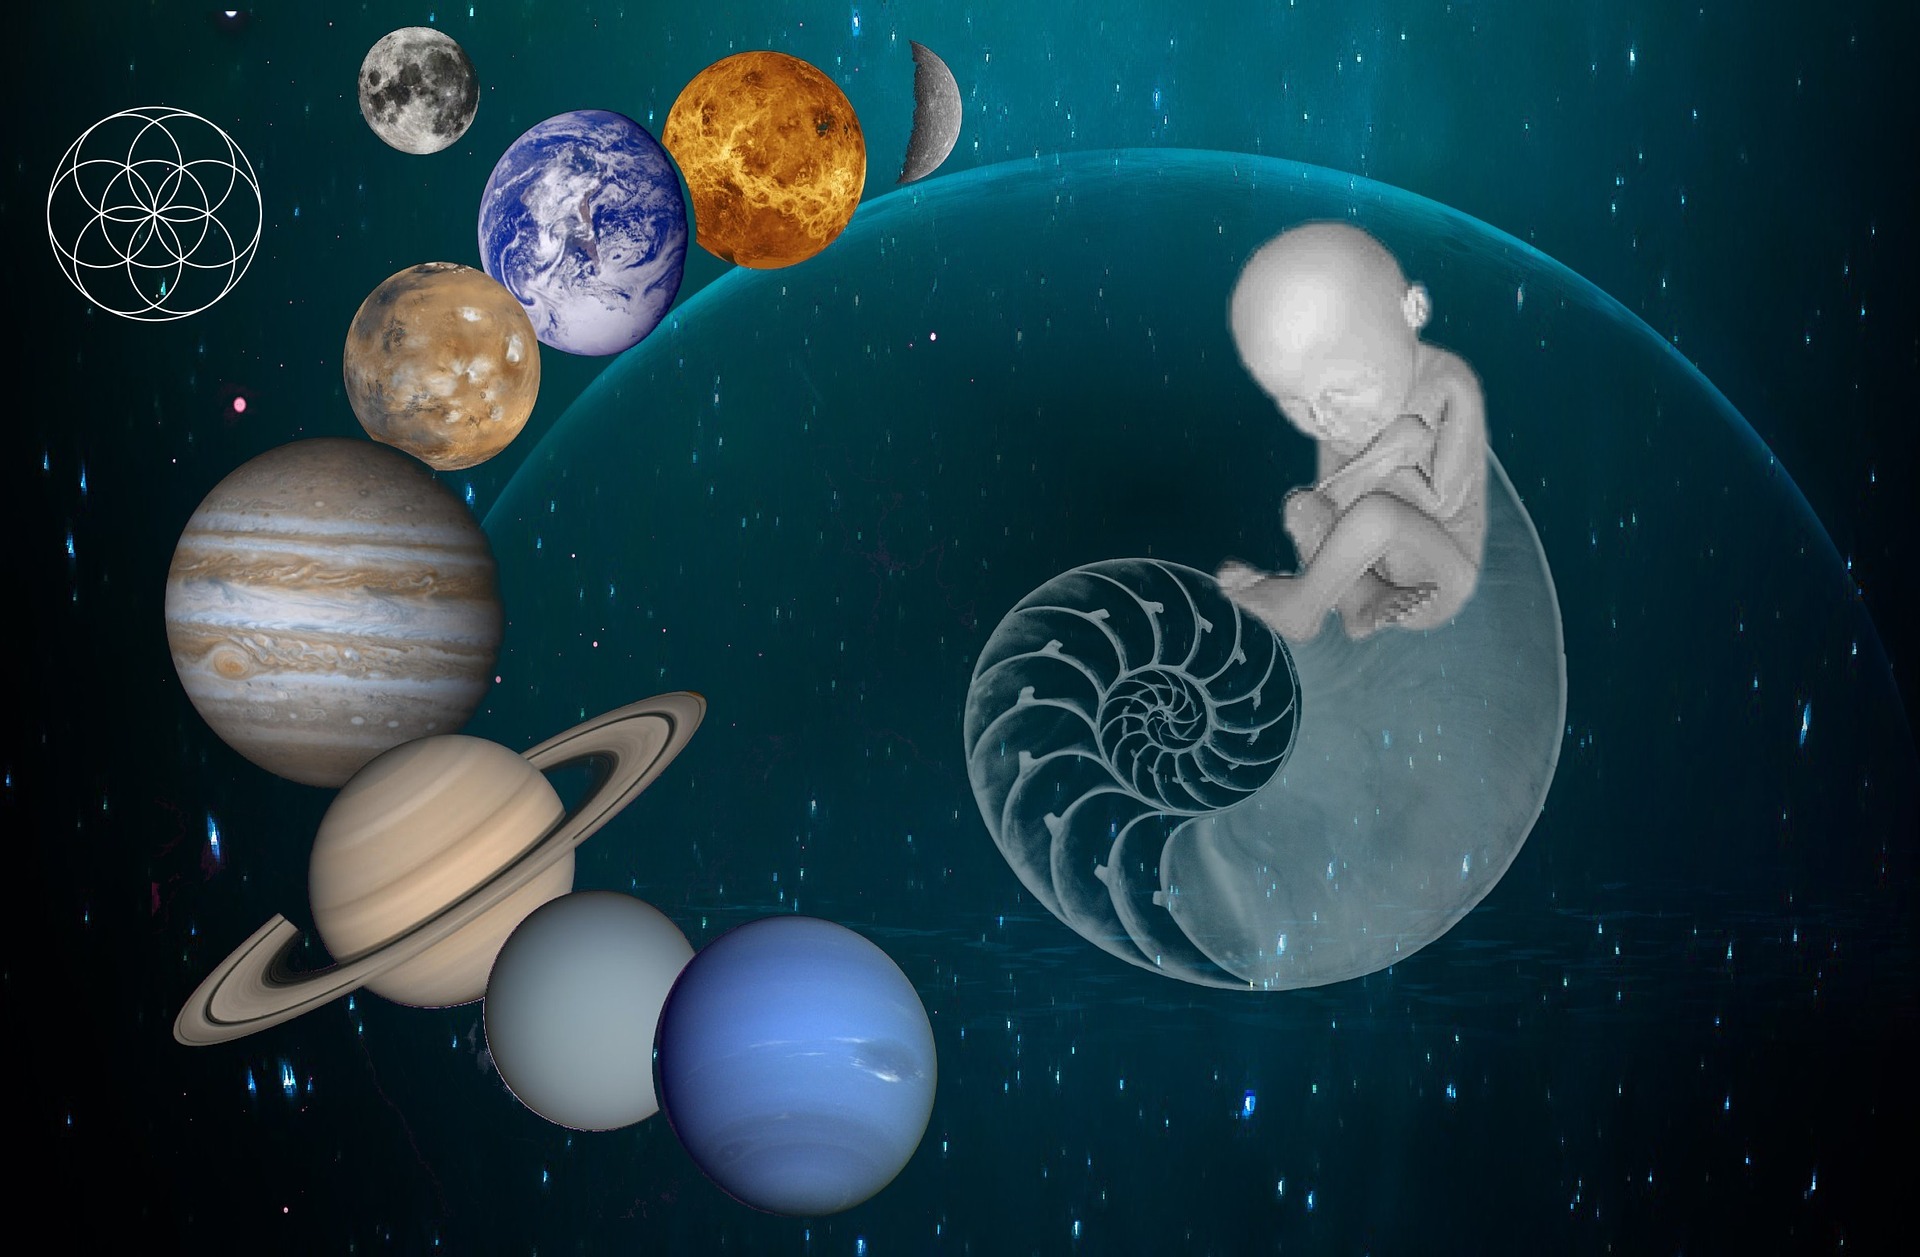 Universe spiral: Baby and planets